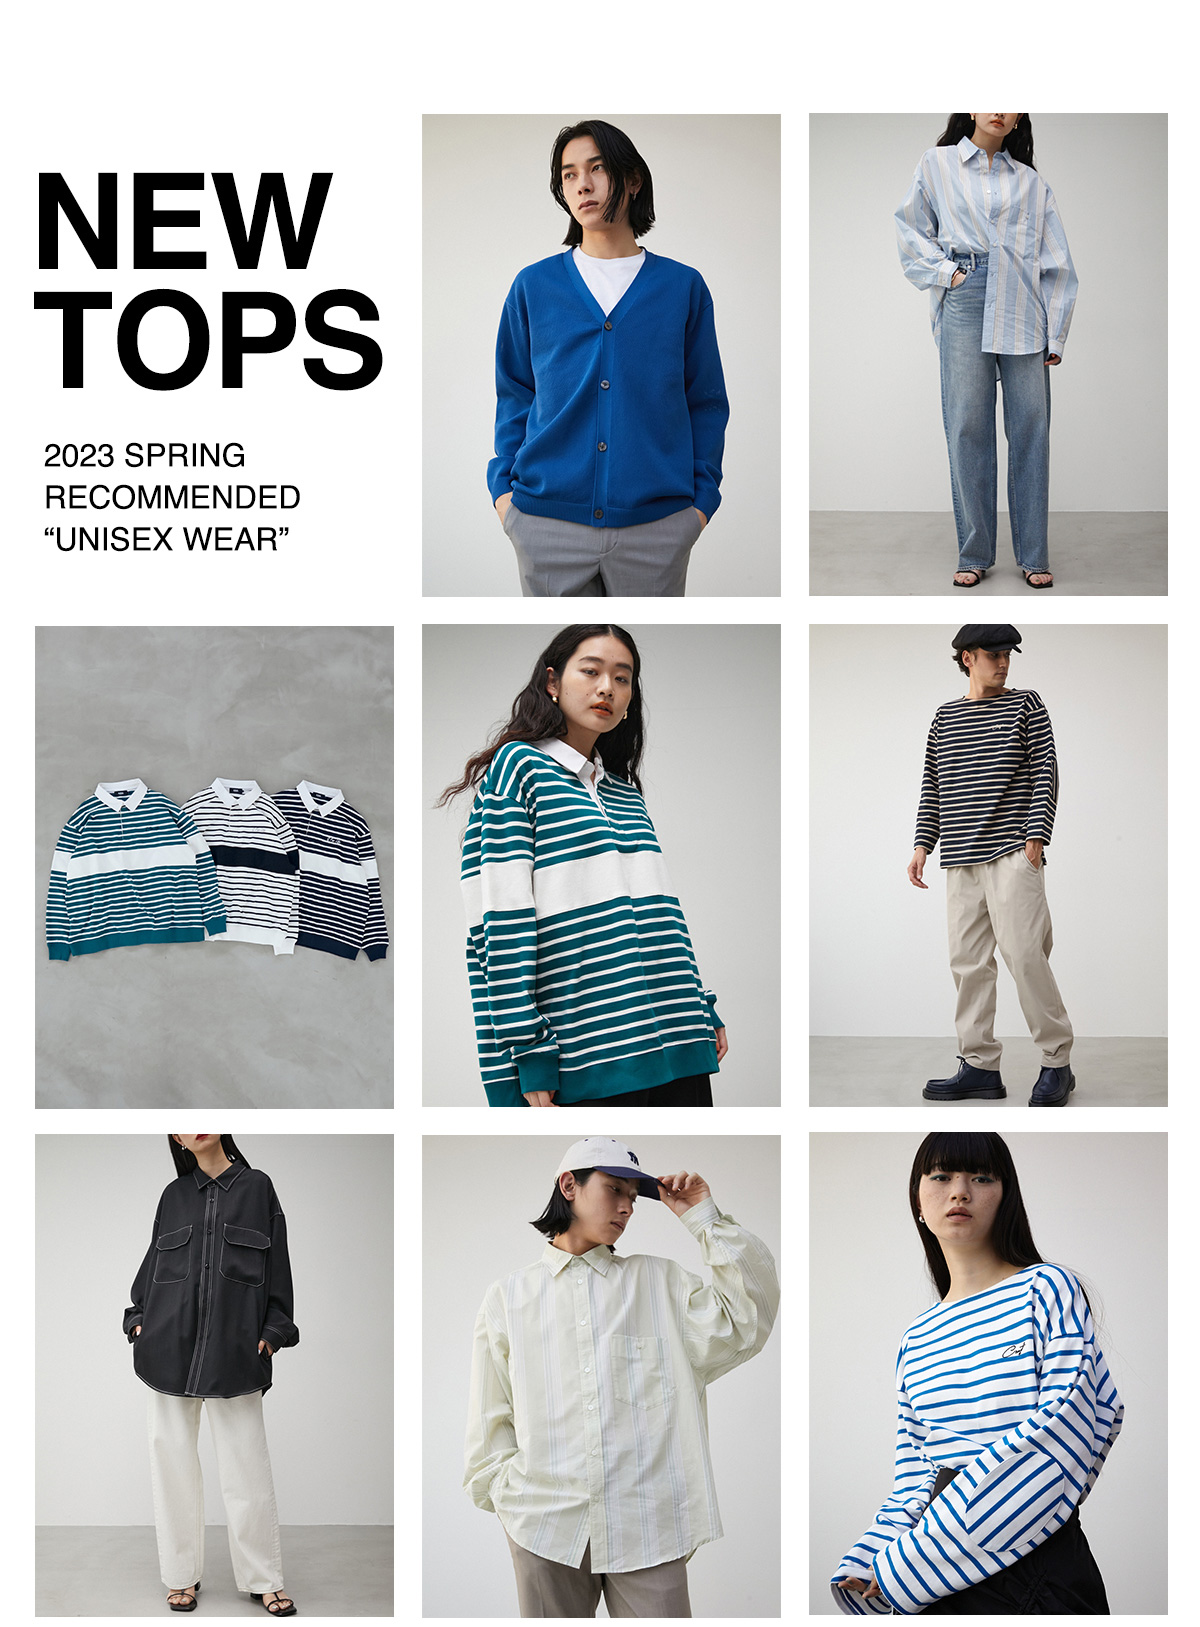 NEW TOPS 2023 SPRING RECOMMENDED ”UNISEX WEAR”